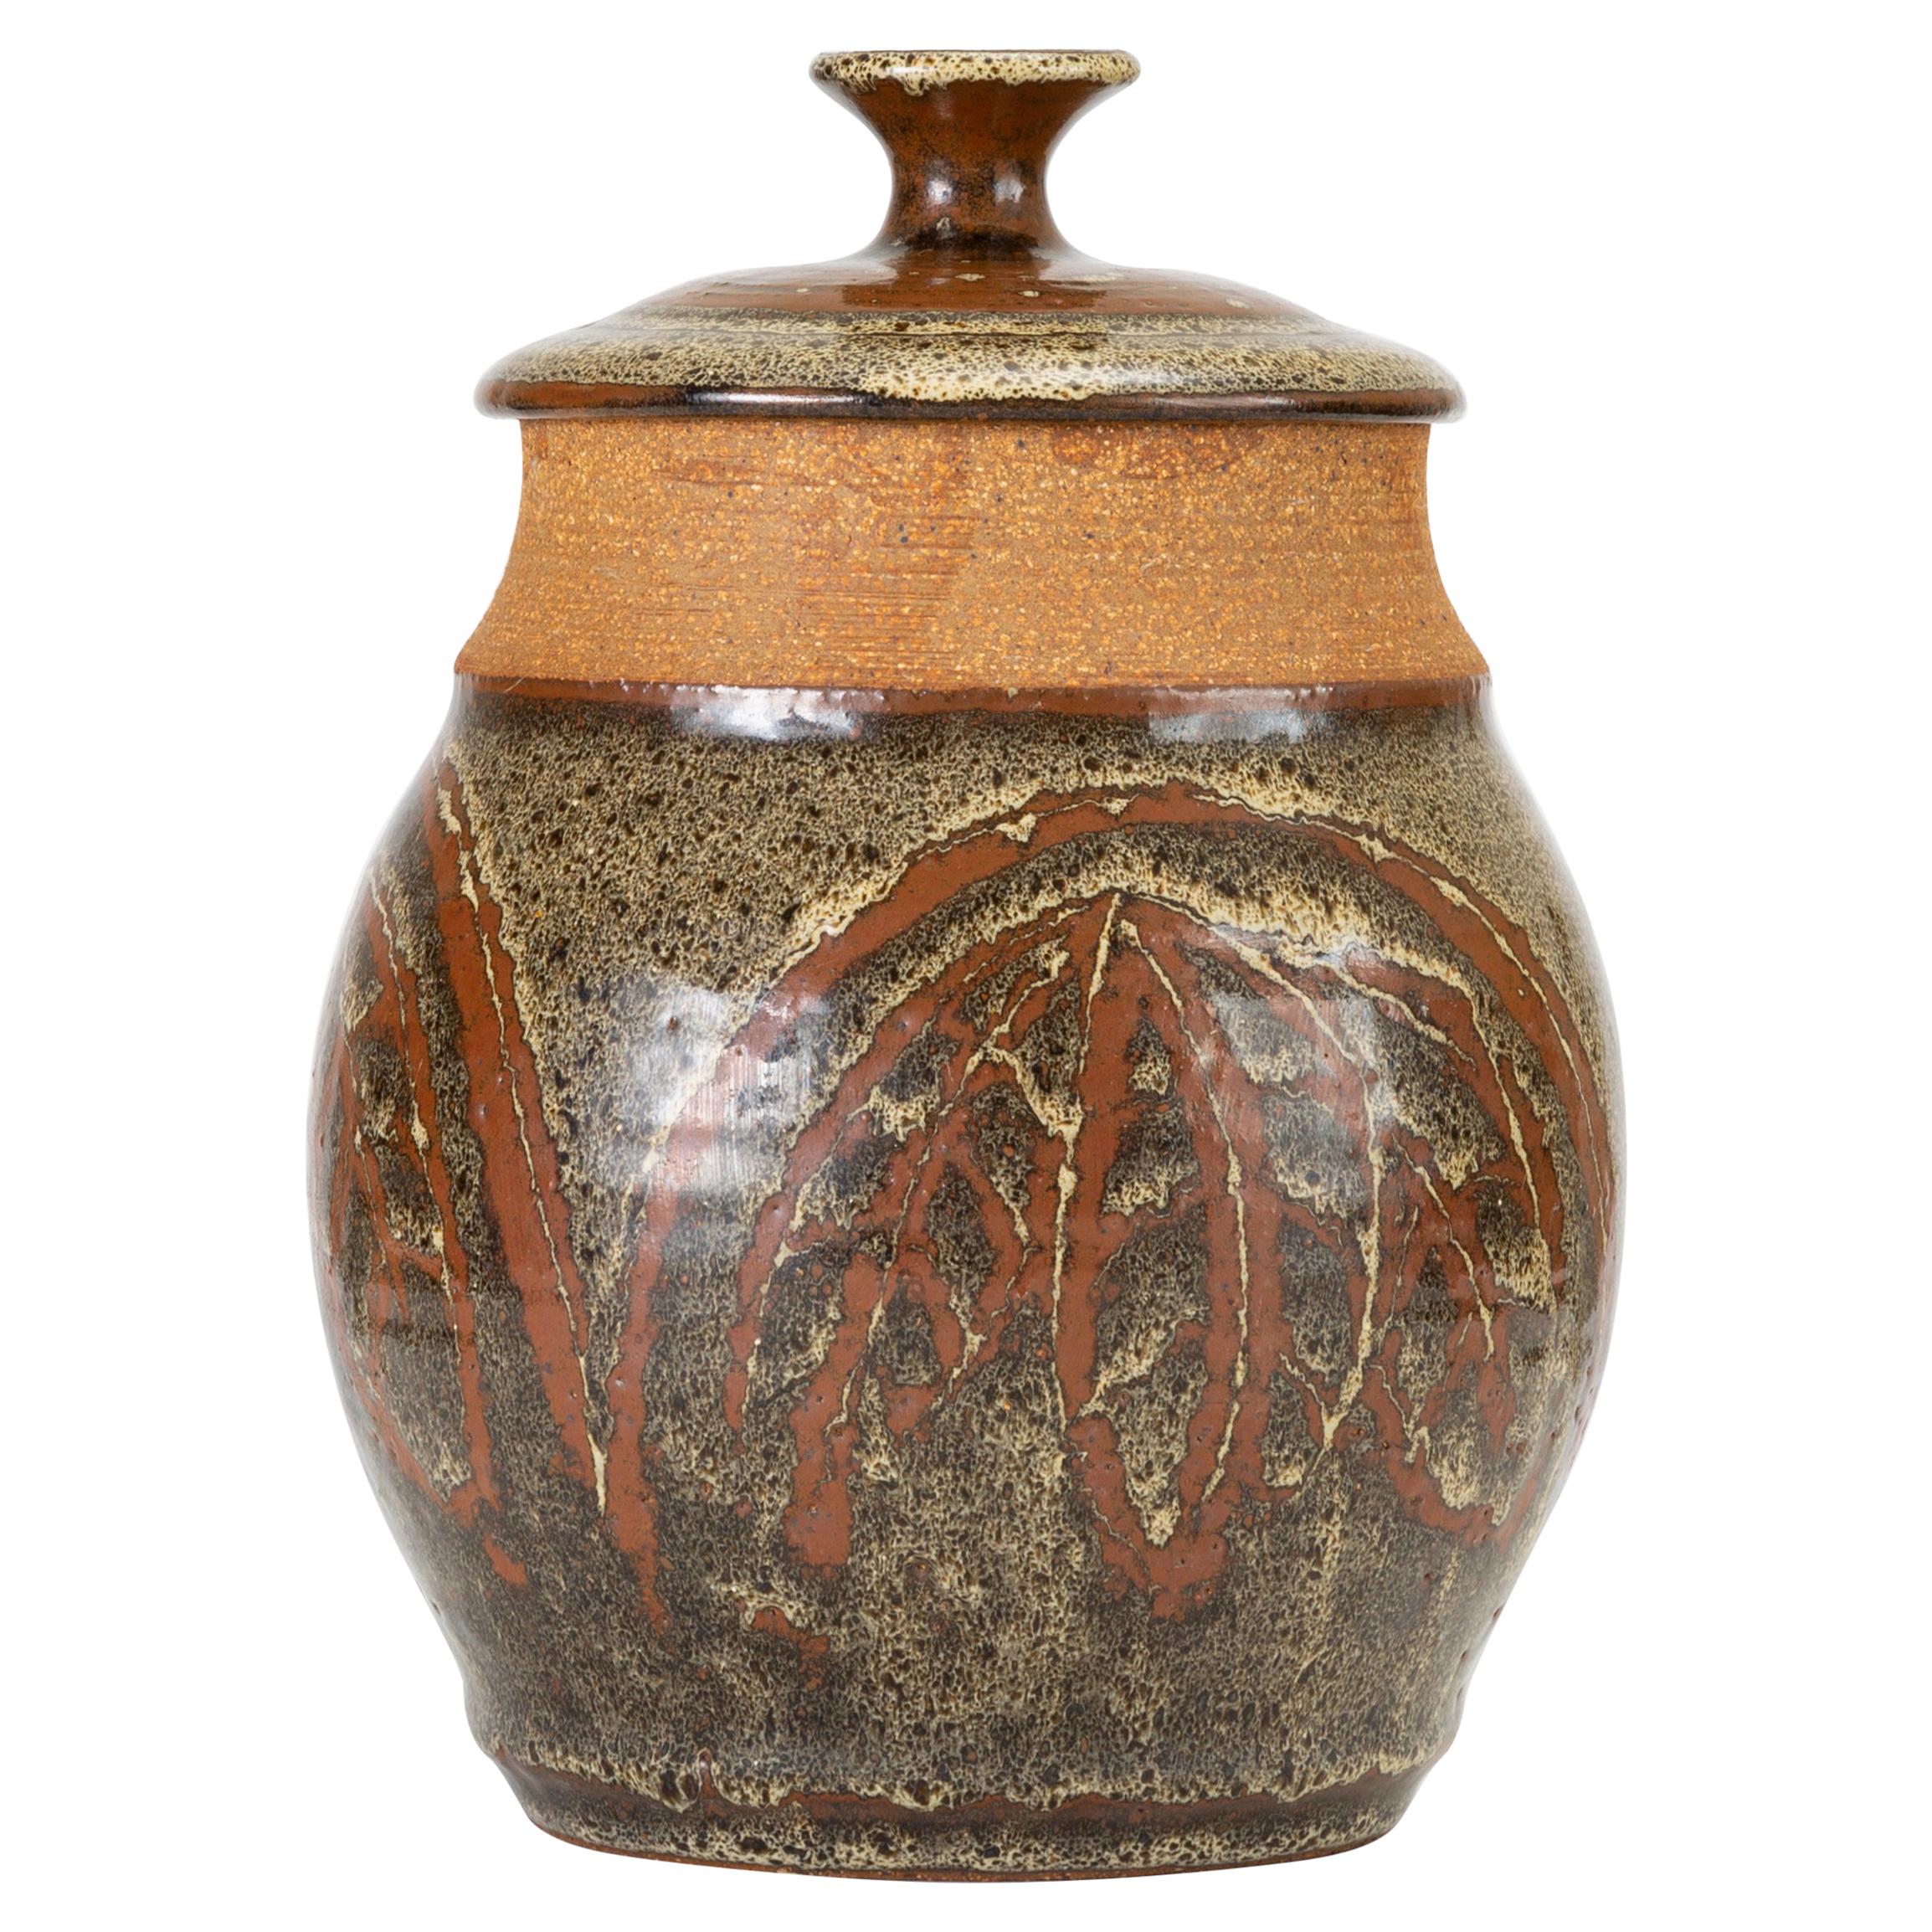 California Modern Studio Pottery Urn with Leaf Pattern by Don Jennings